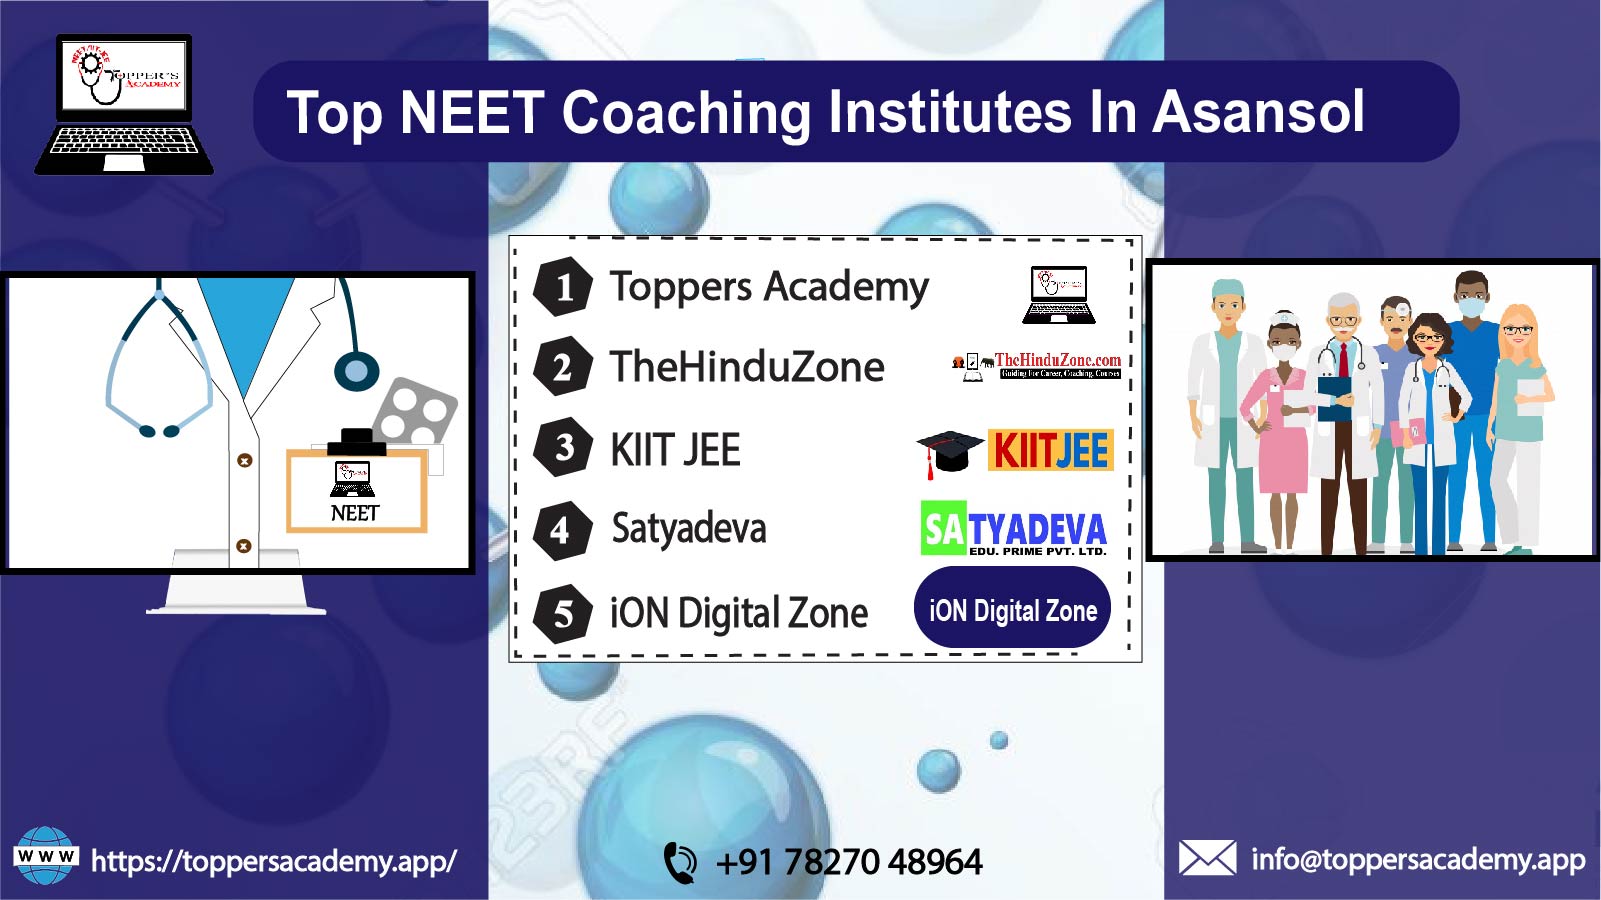 List of the top NEET Coaching In Asansol